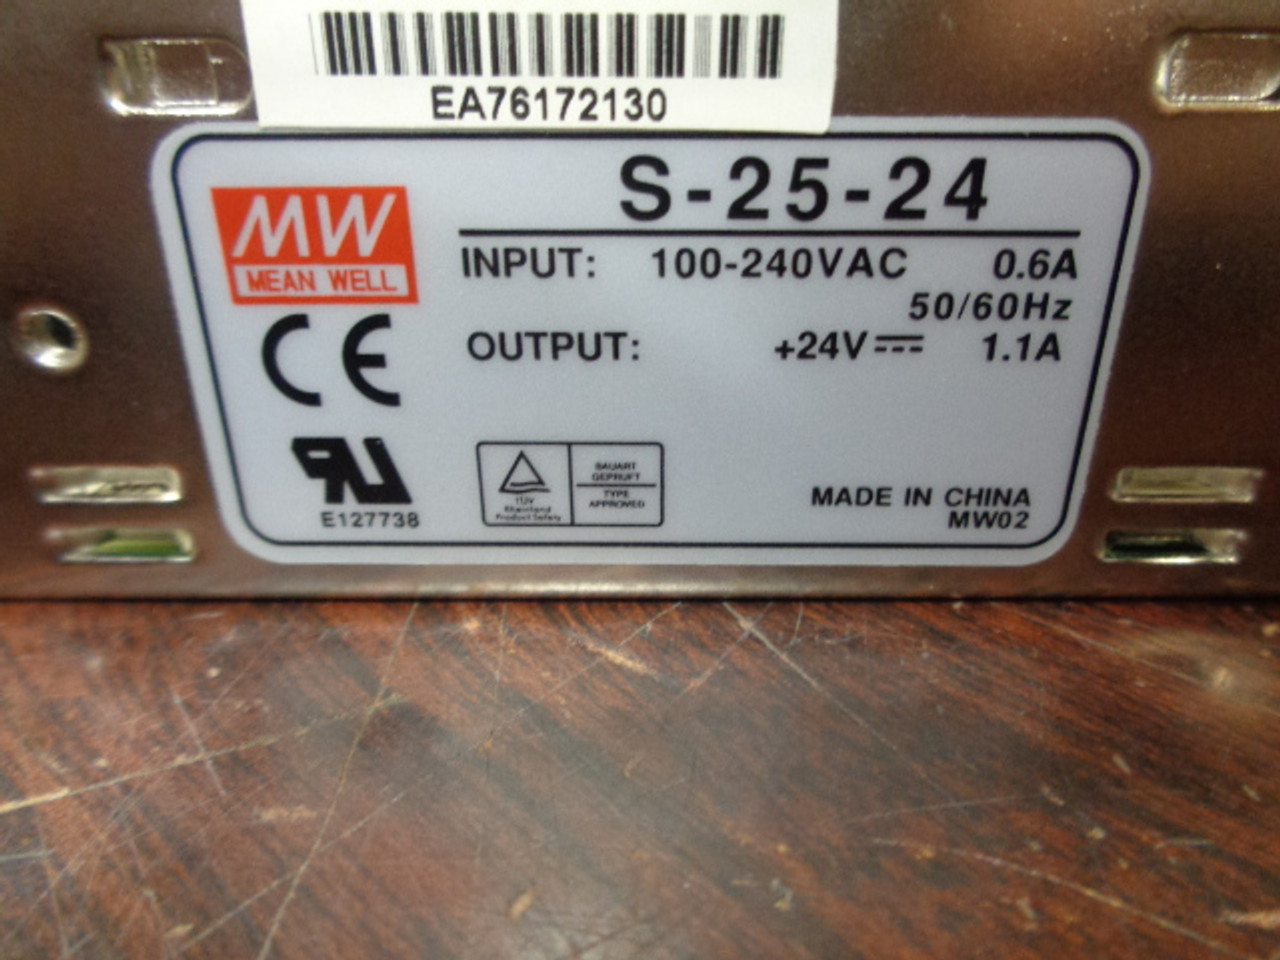 Mean Well S-25-24 Power Supply2